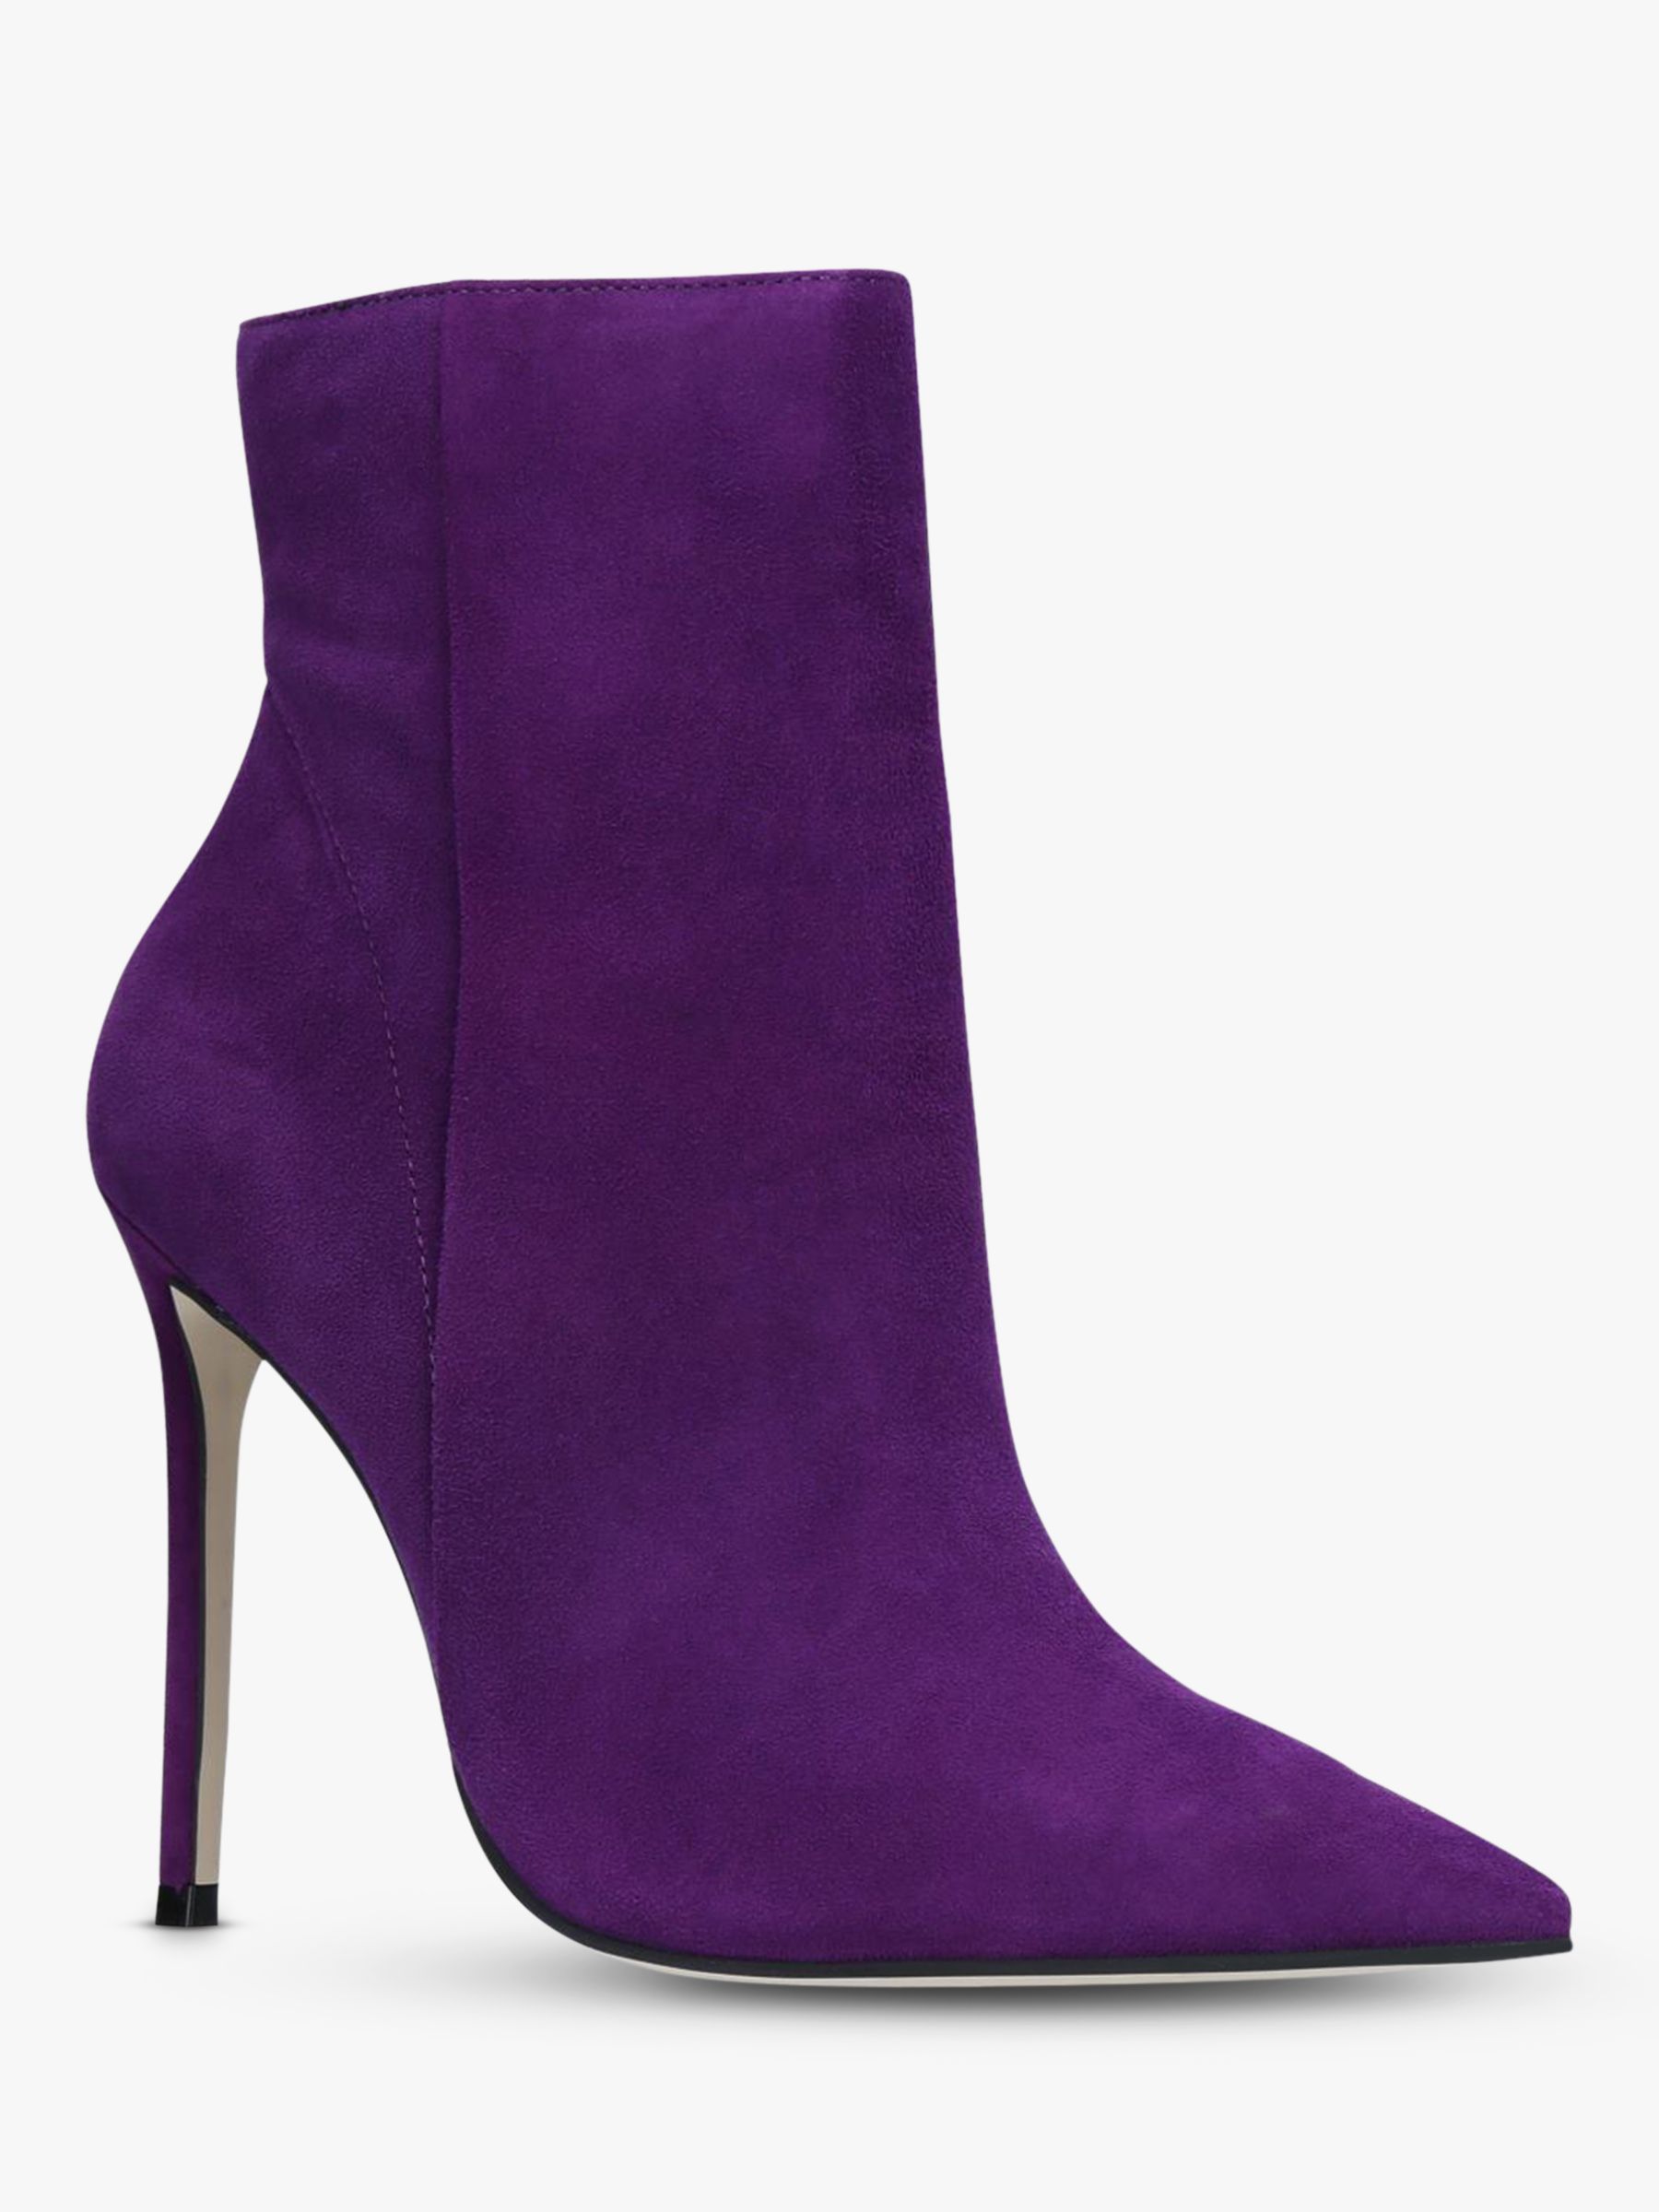 Carvela Spectacular Stiletto Heeled Pointed Toe Ankle Boots, Purple ...